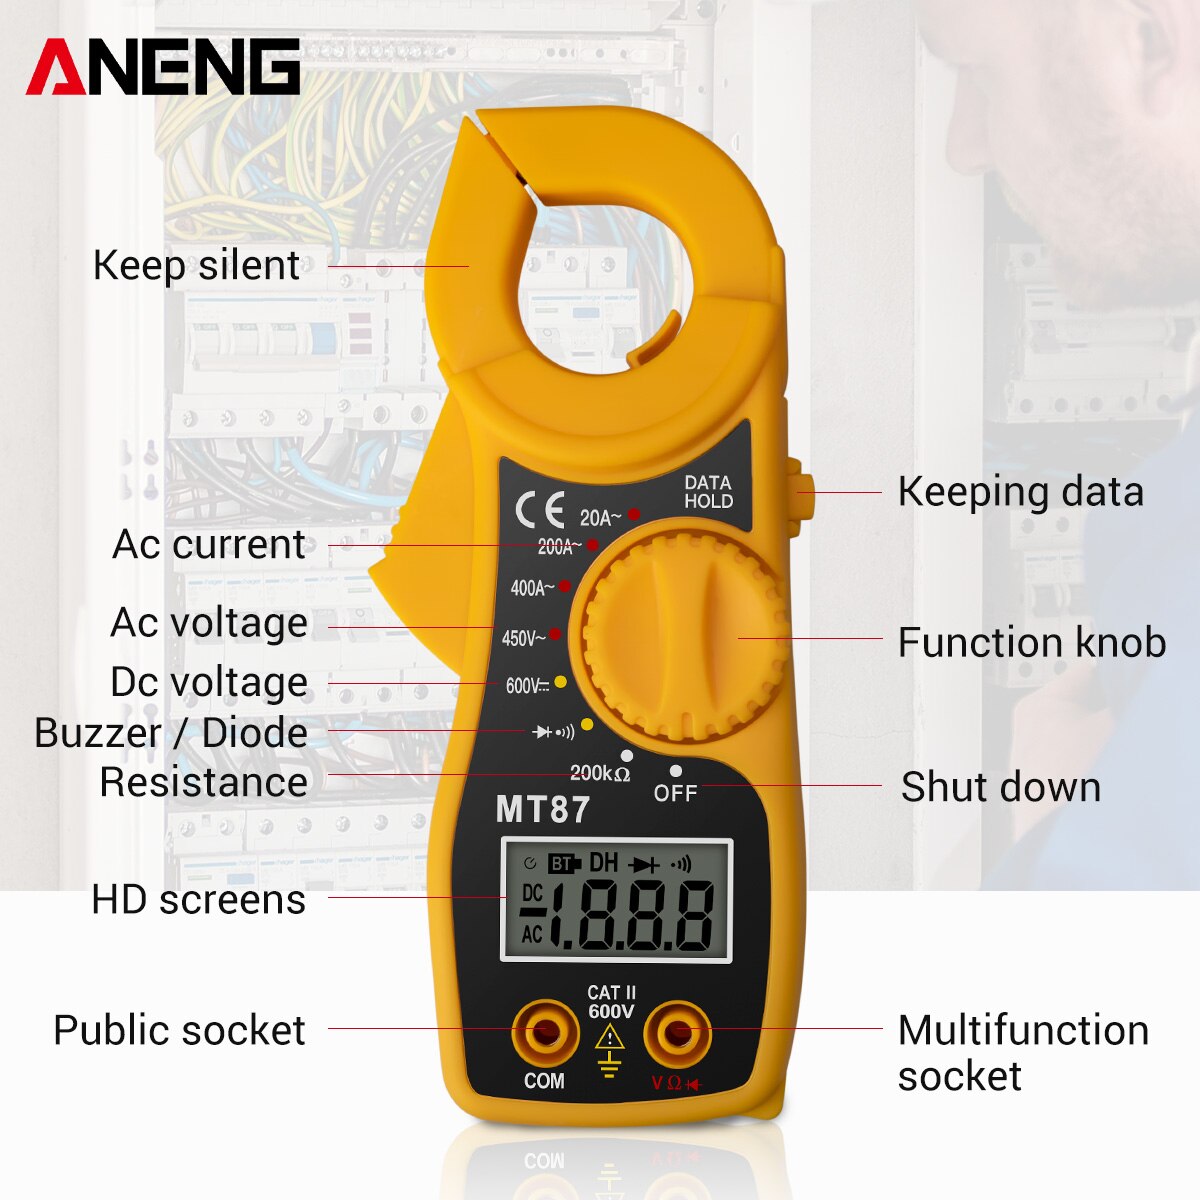 ANENG MT87 1999 Counts Digital Clamp Meter DC/AC Multimeter Ammeter Voltage Tester NCV Ohm High Precision Detector Tool